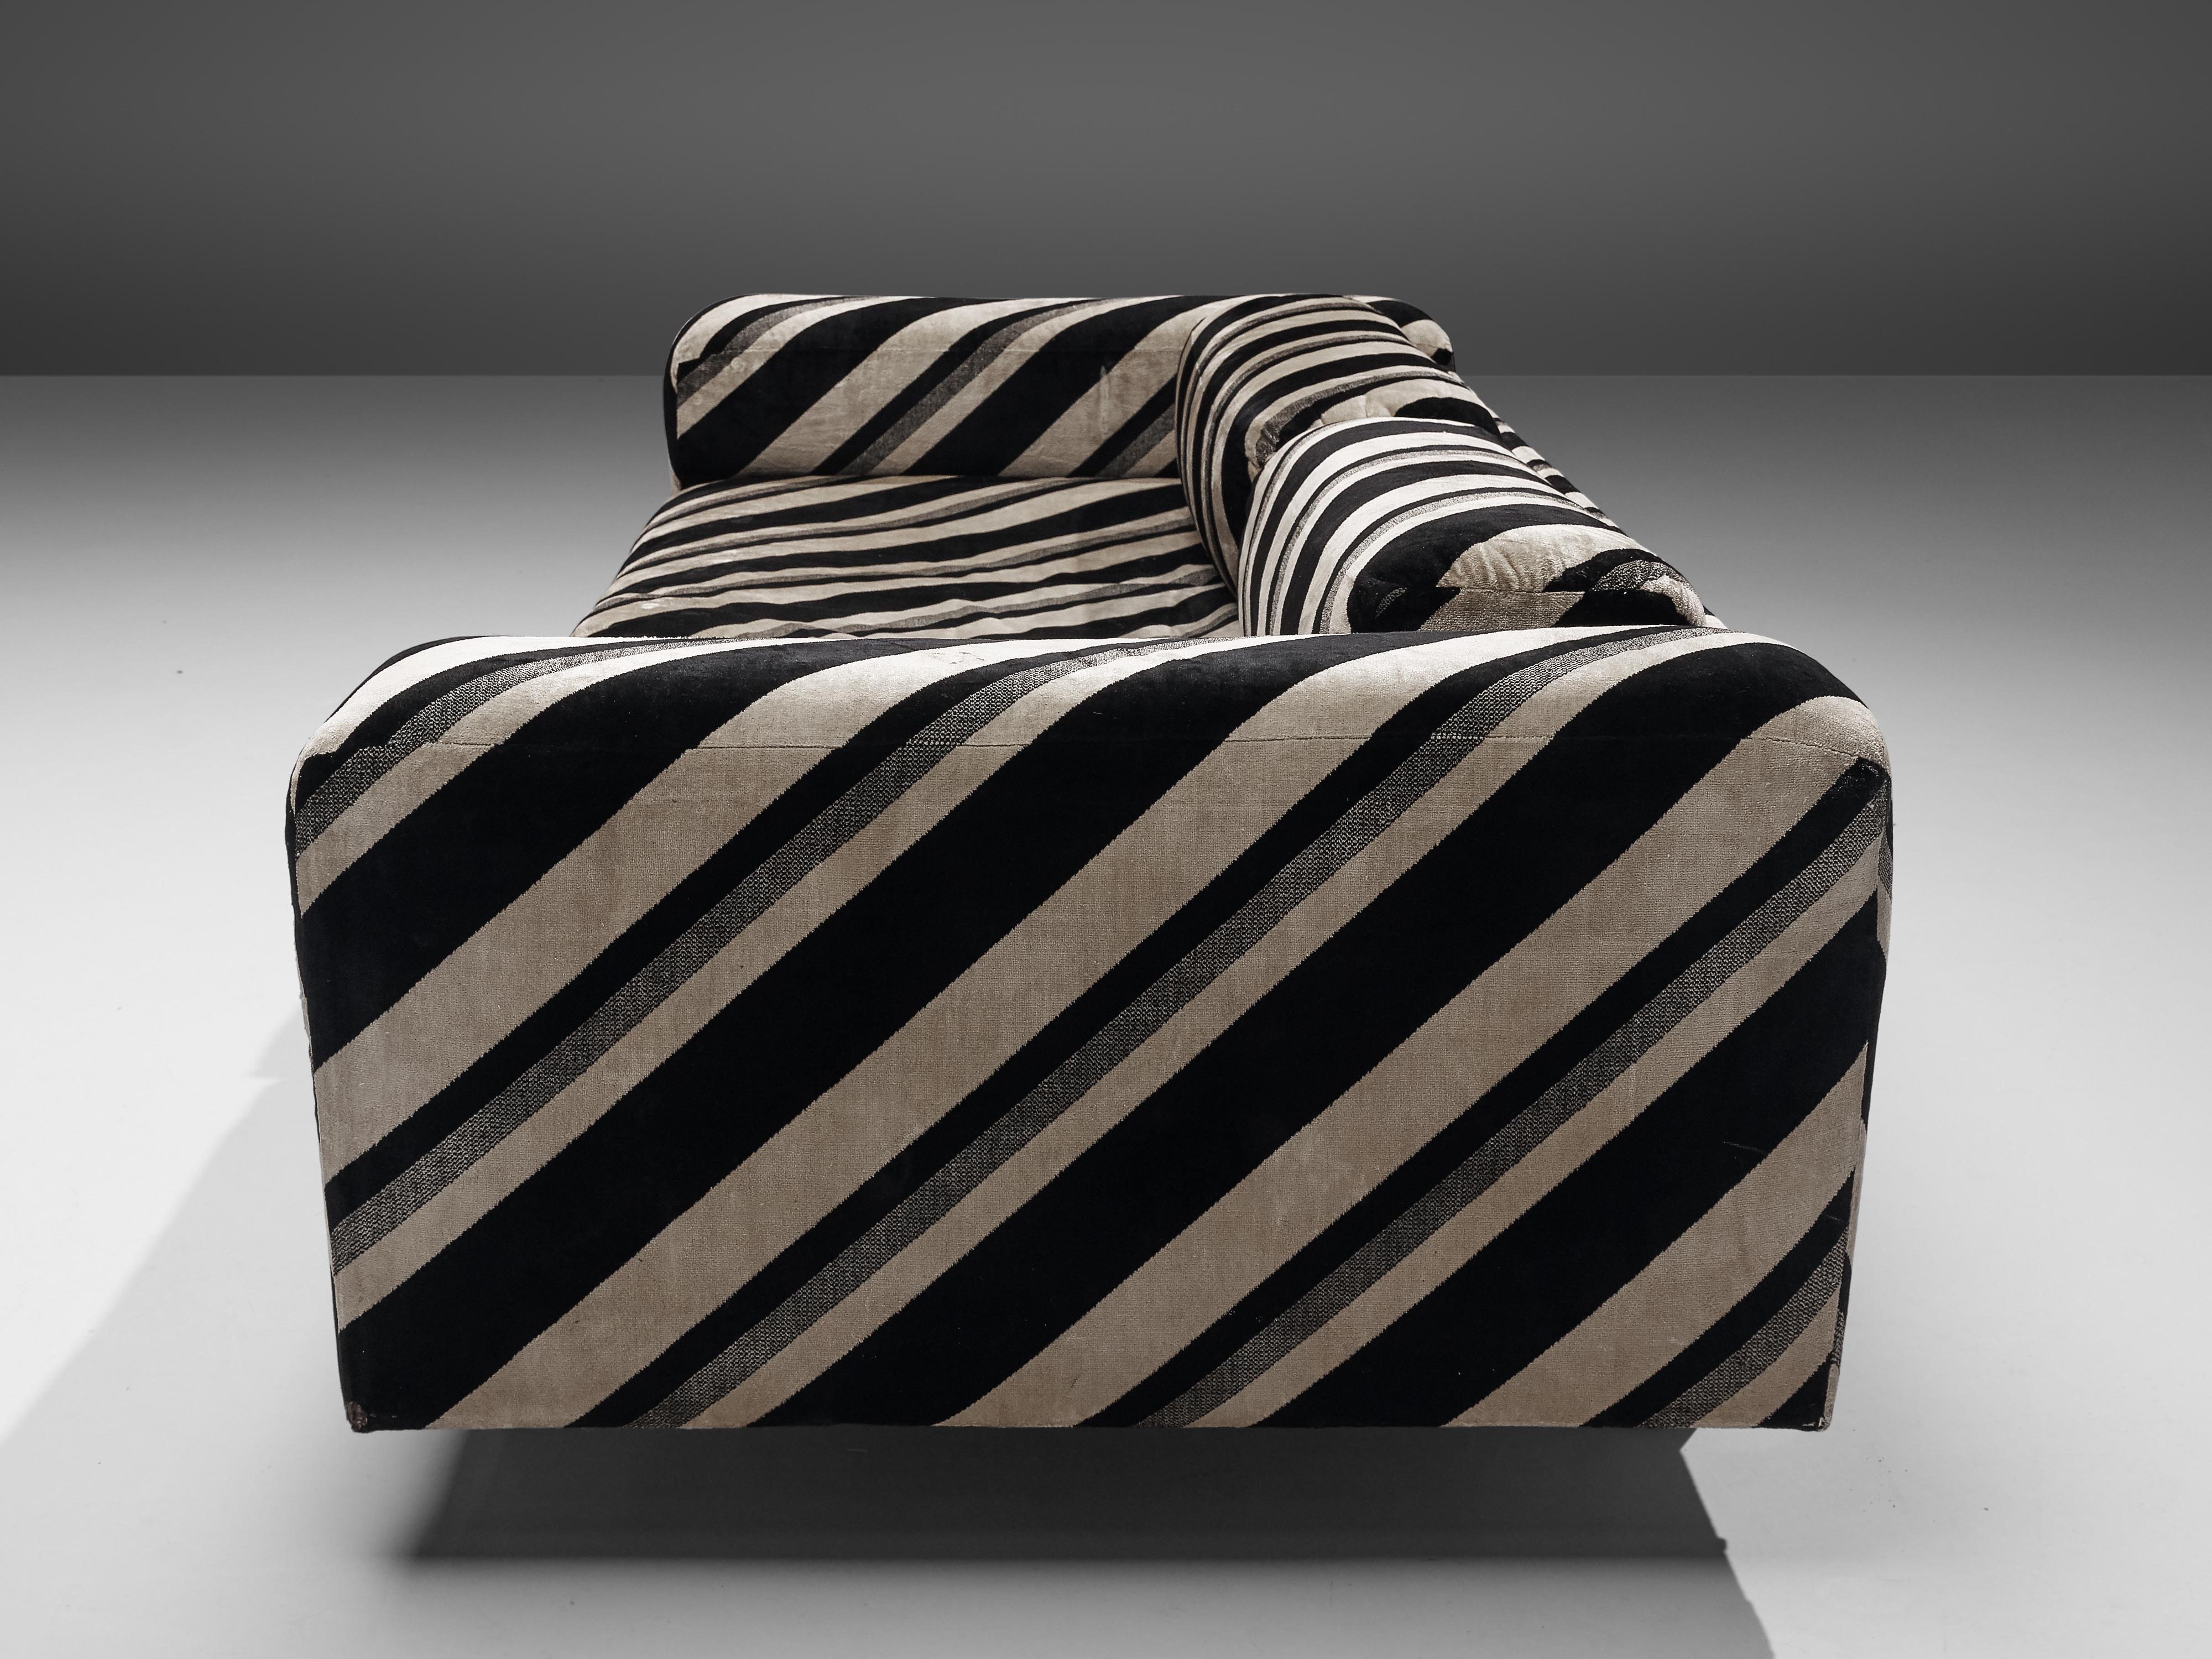 Howard Keith Grand 'Diplomat' Sofas in Striped Fabric 4